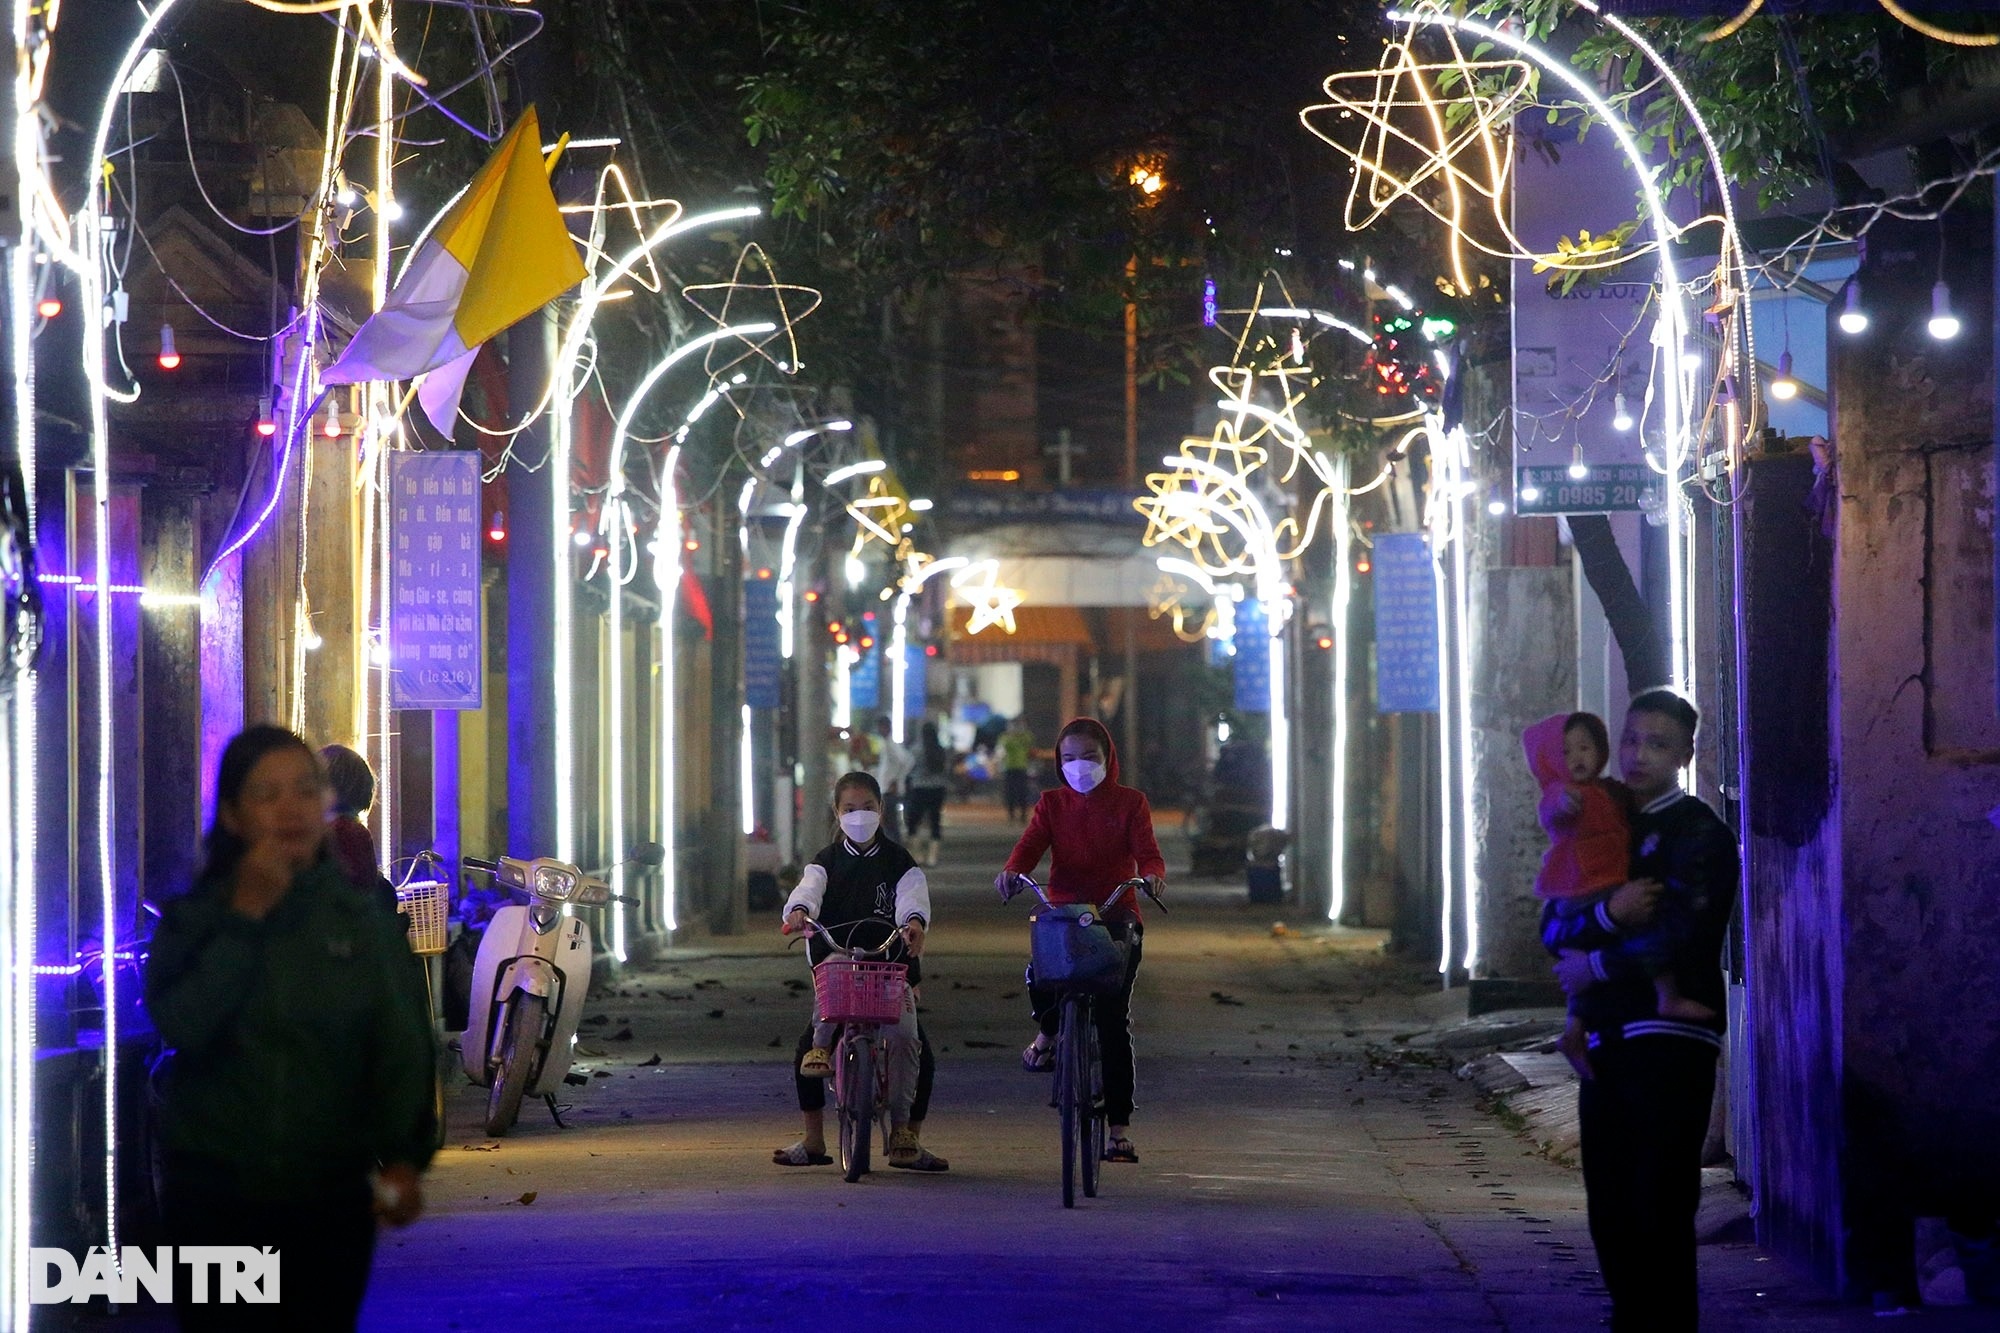 The 100-year-old village in Hanoi shimmers like a fairyland on Christmas Eve - 8